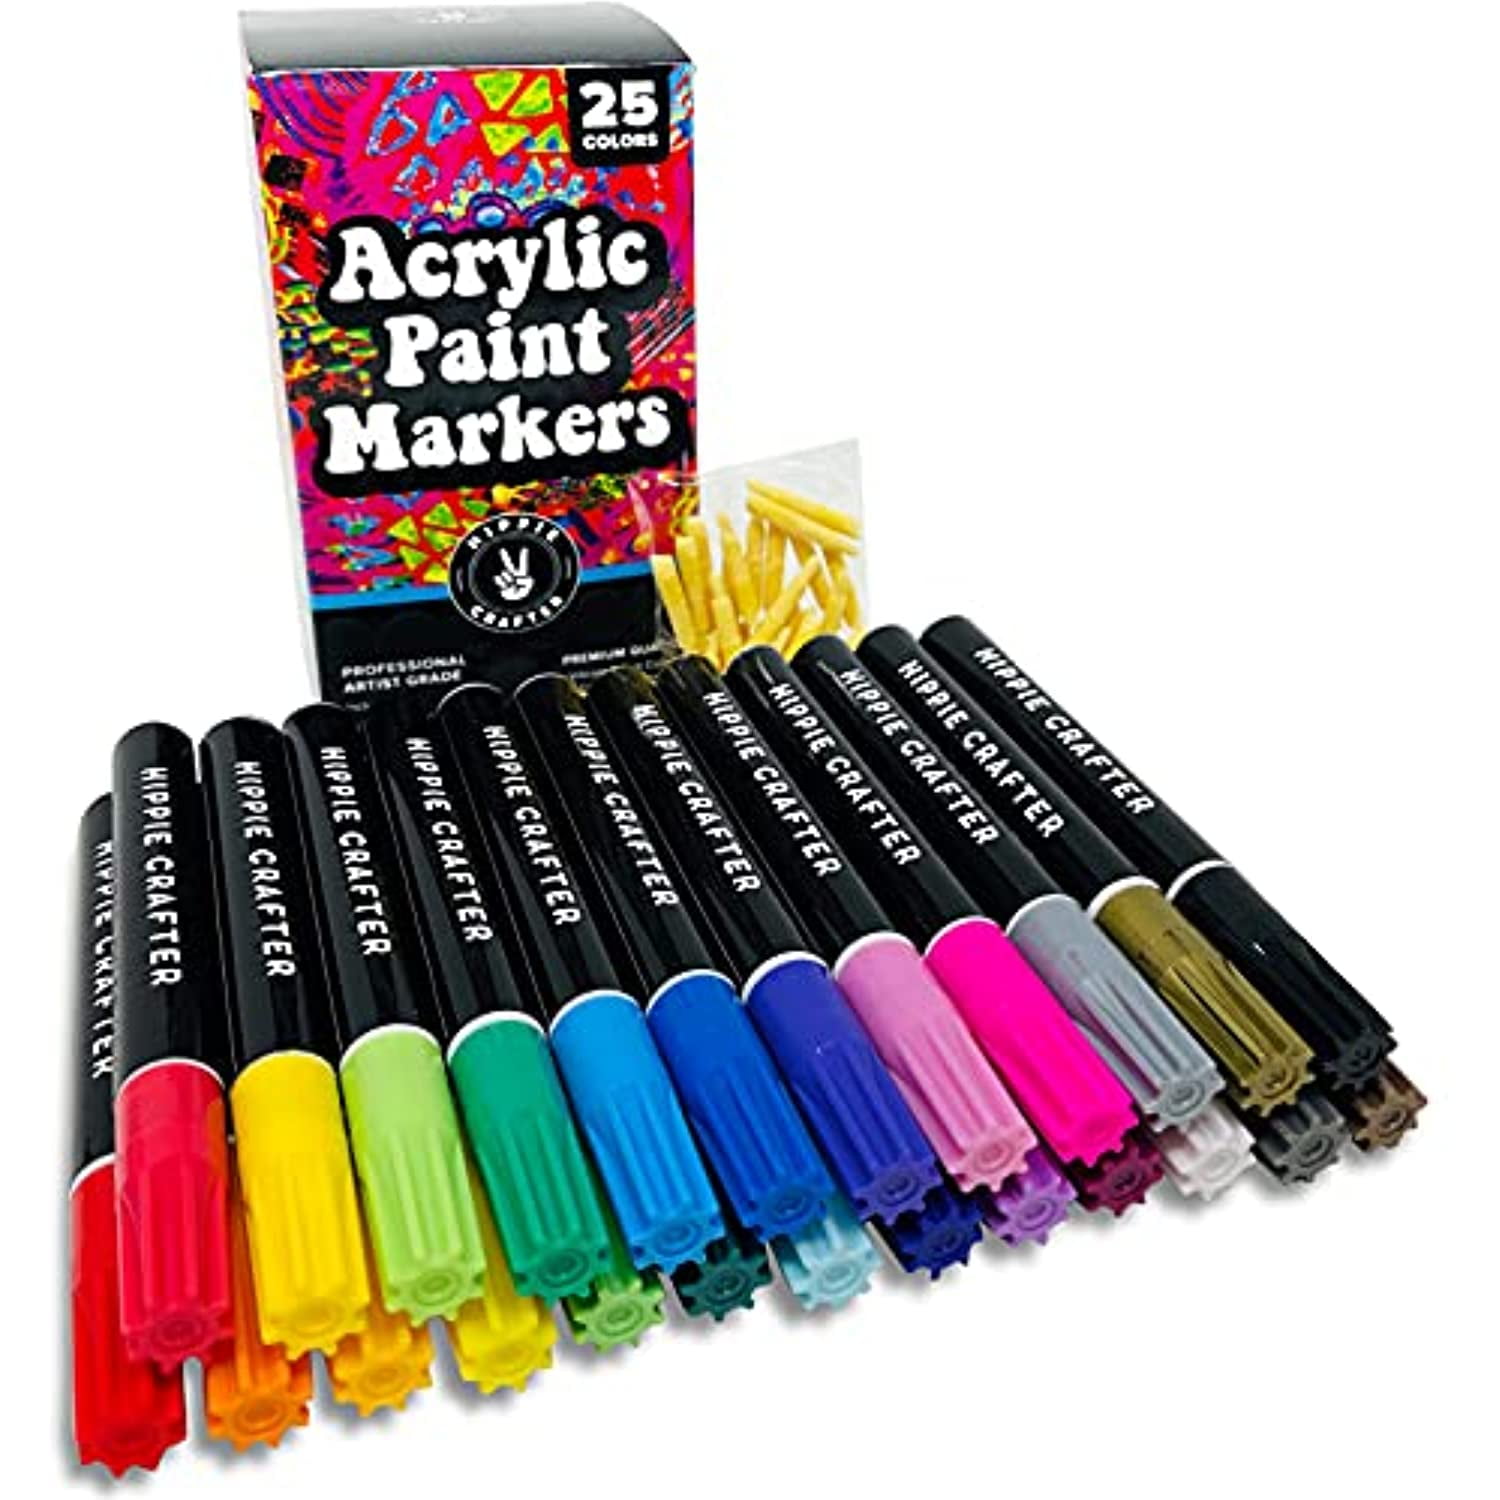  Arrtx Acrylic Paint Pens, 10 Pack Extra Brush Tip White Paint  Markers Metallic for Rock Fabric Wood Glass Canvas Ceramic, 4 White 4 Black  1 Gold & 1 Silver, Water Based